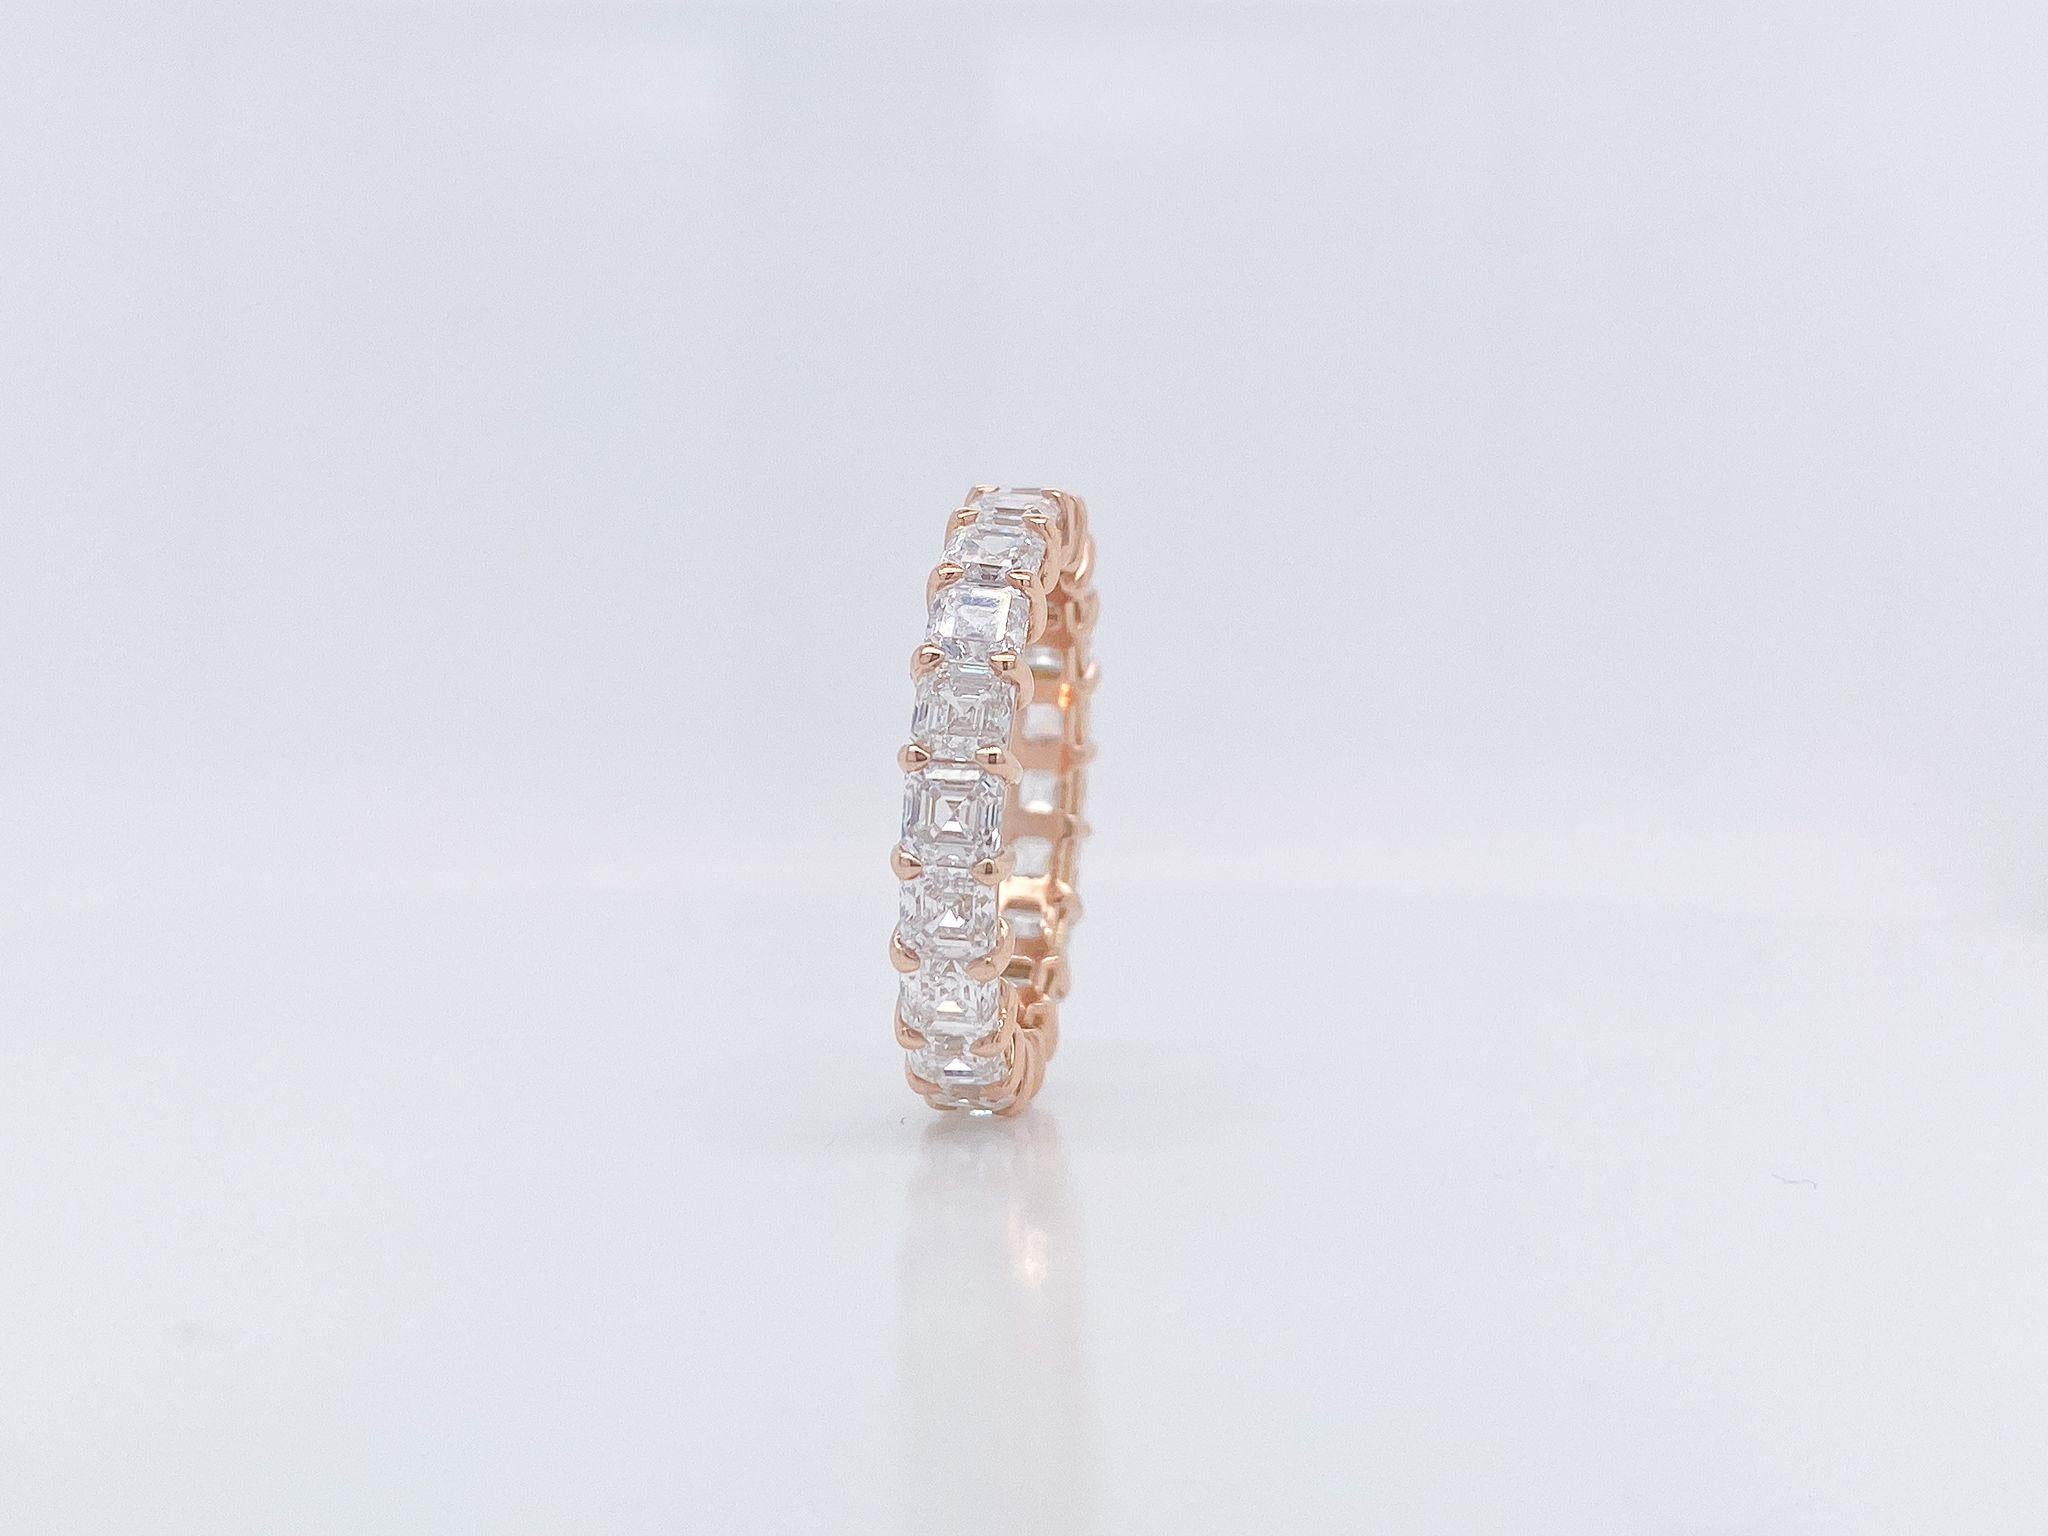 Imagine the look on her face when she sees this Asscher Diamond Eternity Band; featuring 20 Asscher Diamonds, weighing 4.67 Total Carat Weight. These diamonds are F Color, VS Clarity, and are set in a 18K Rose Gold setting in a finger size 6.75.